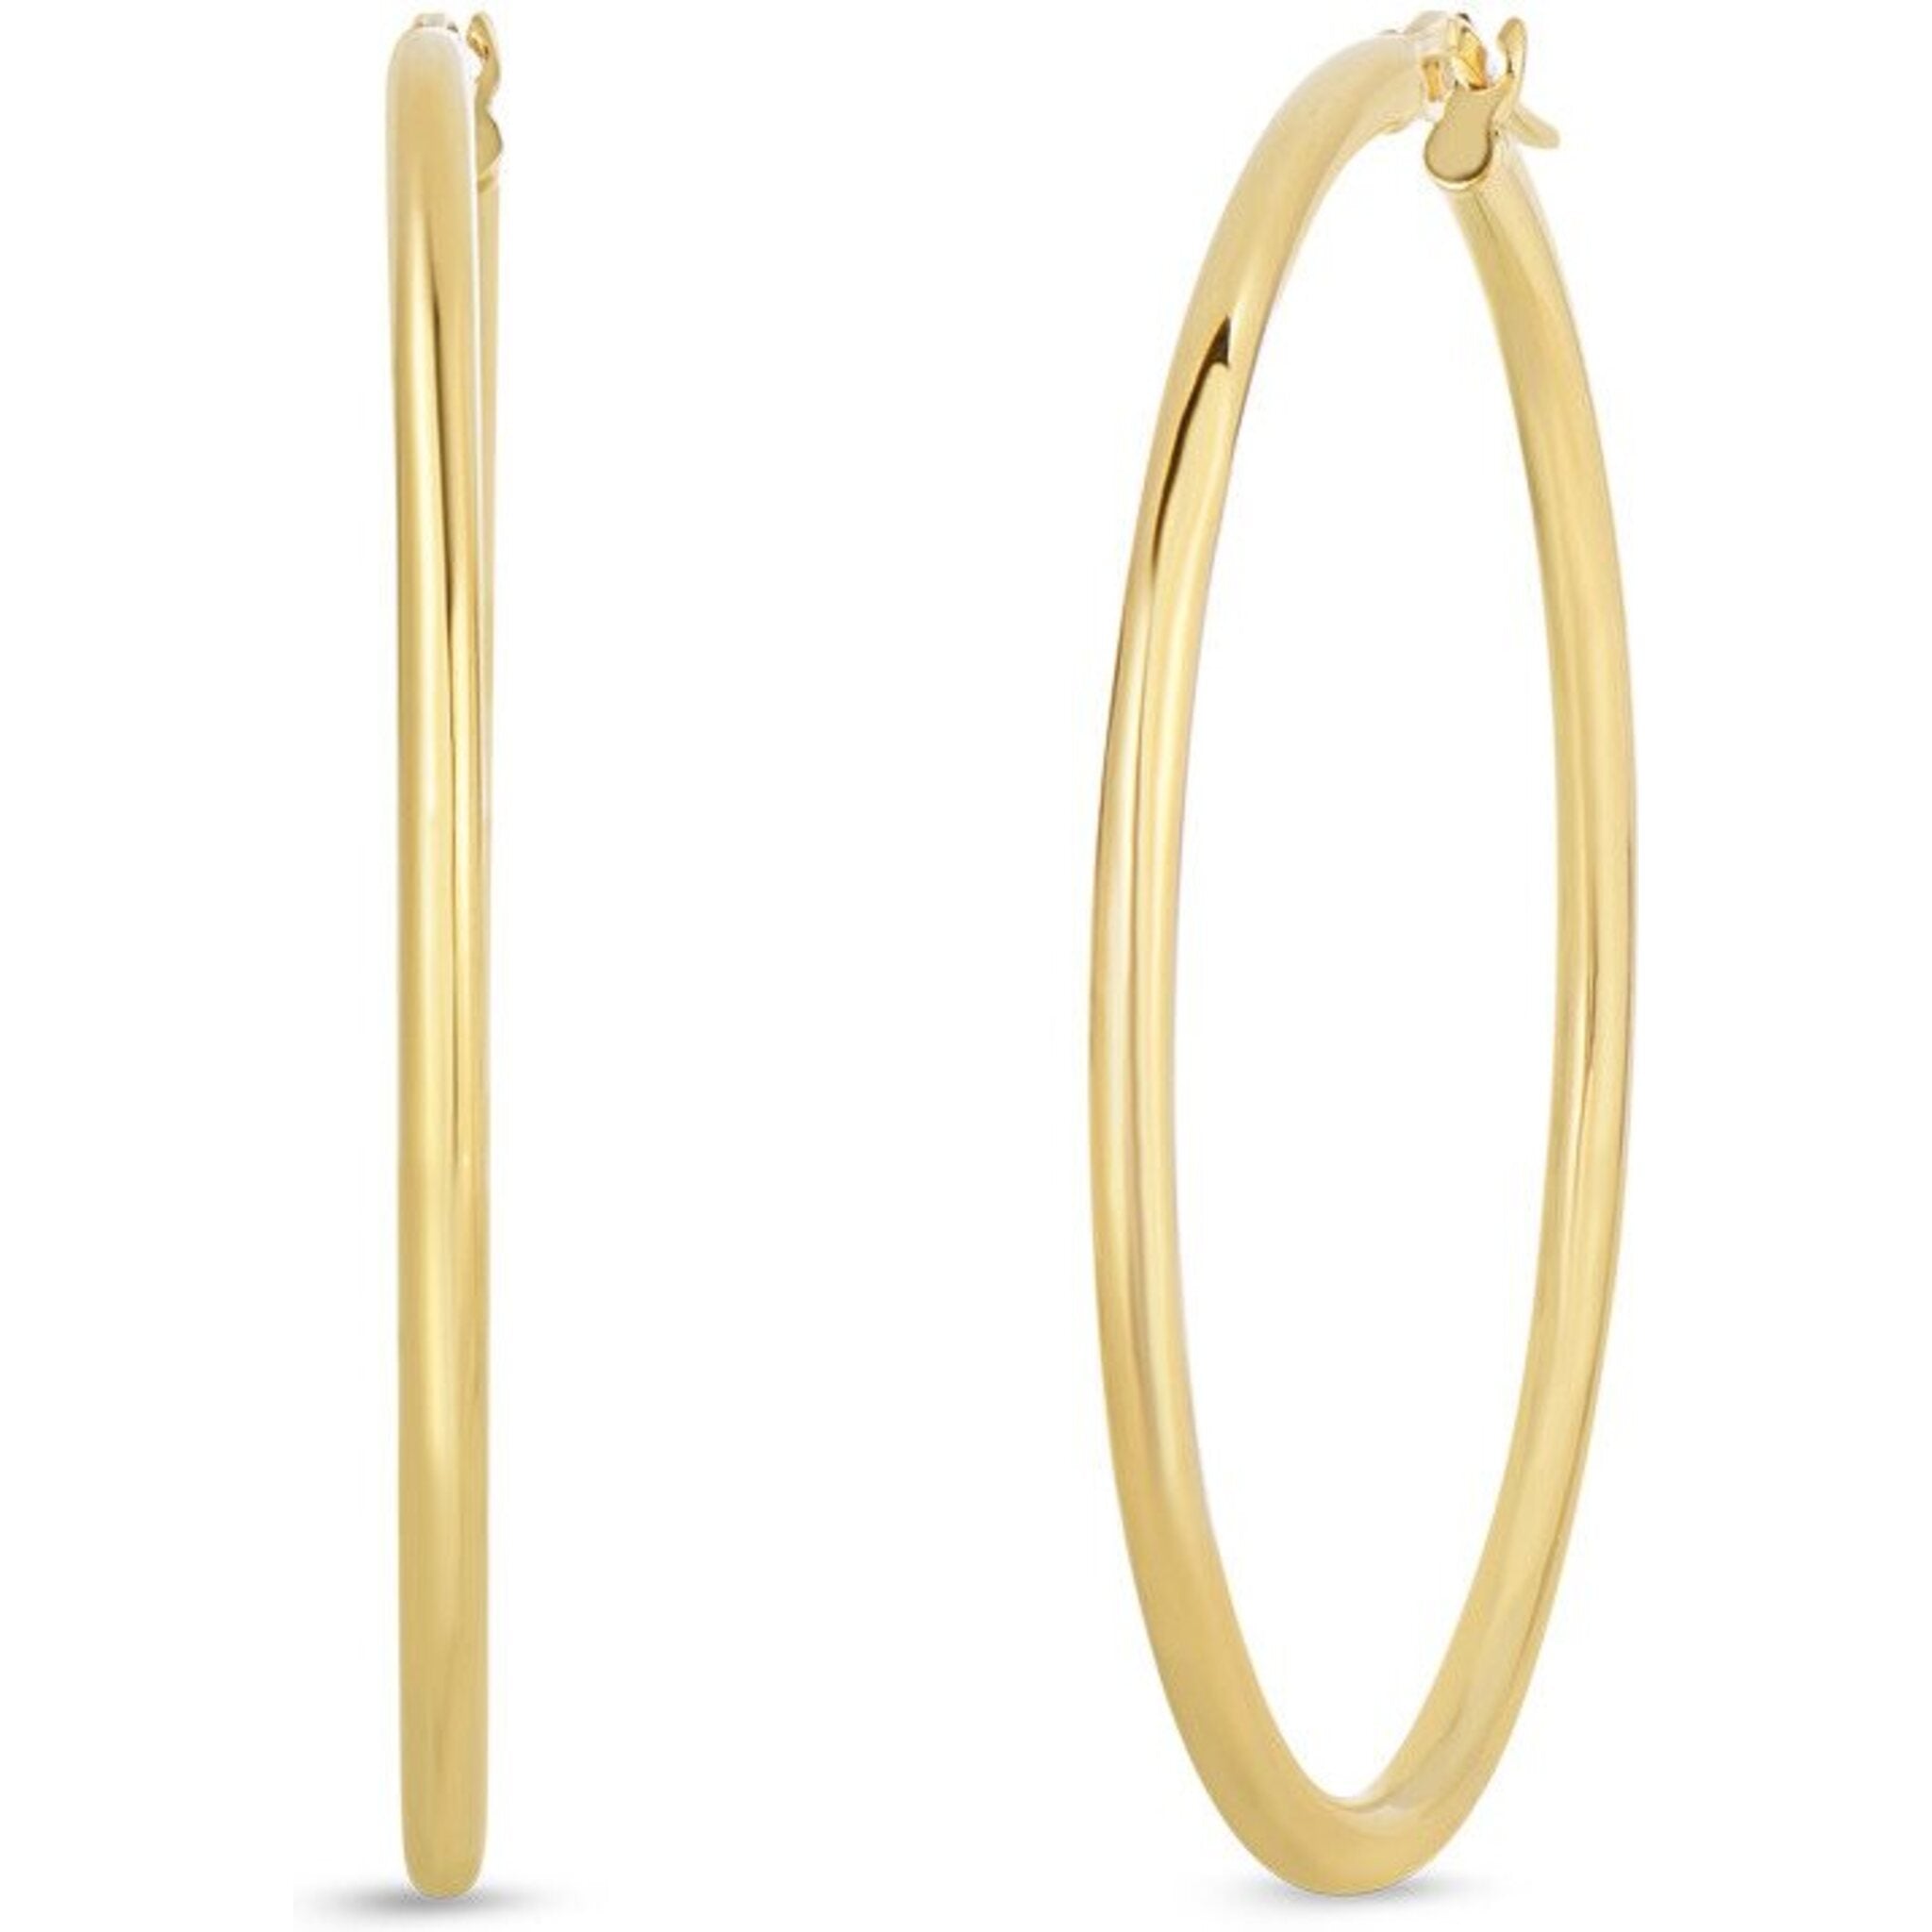 ROBERTO COIN 18K YELLOW GOLD HIGH POLISHED HOOP EARRINGS FROM THE GOLD —  MulloysJewelry